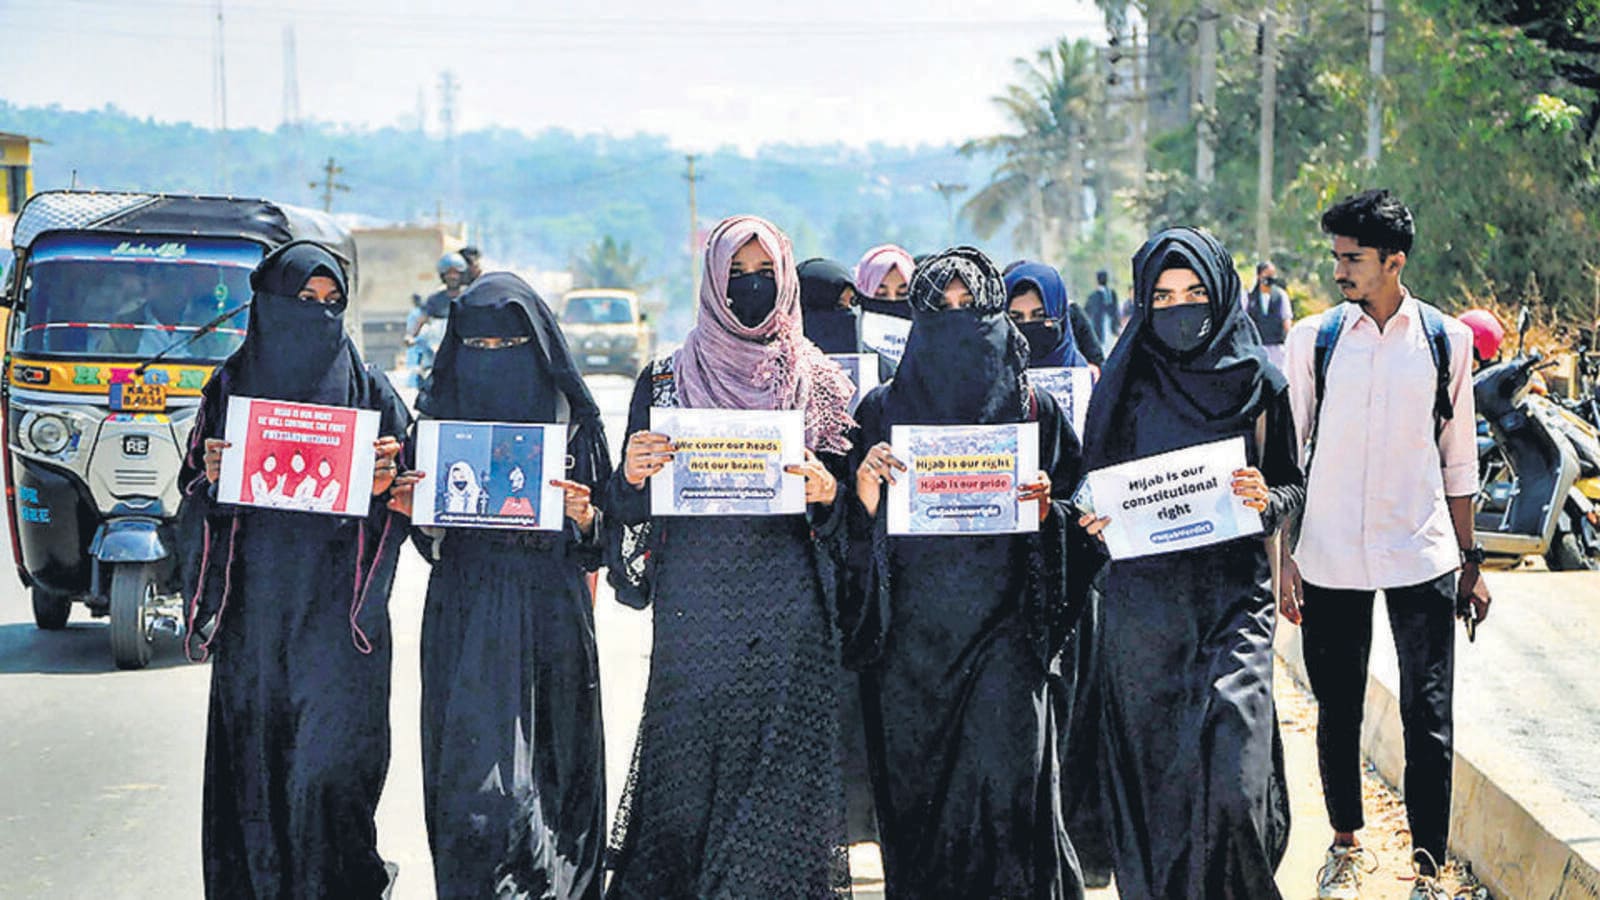 Hijab ban against rights of students, says report | Bengaluru ...